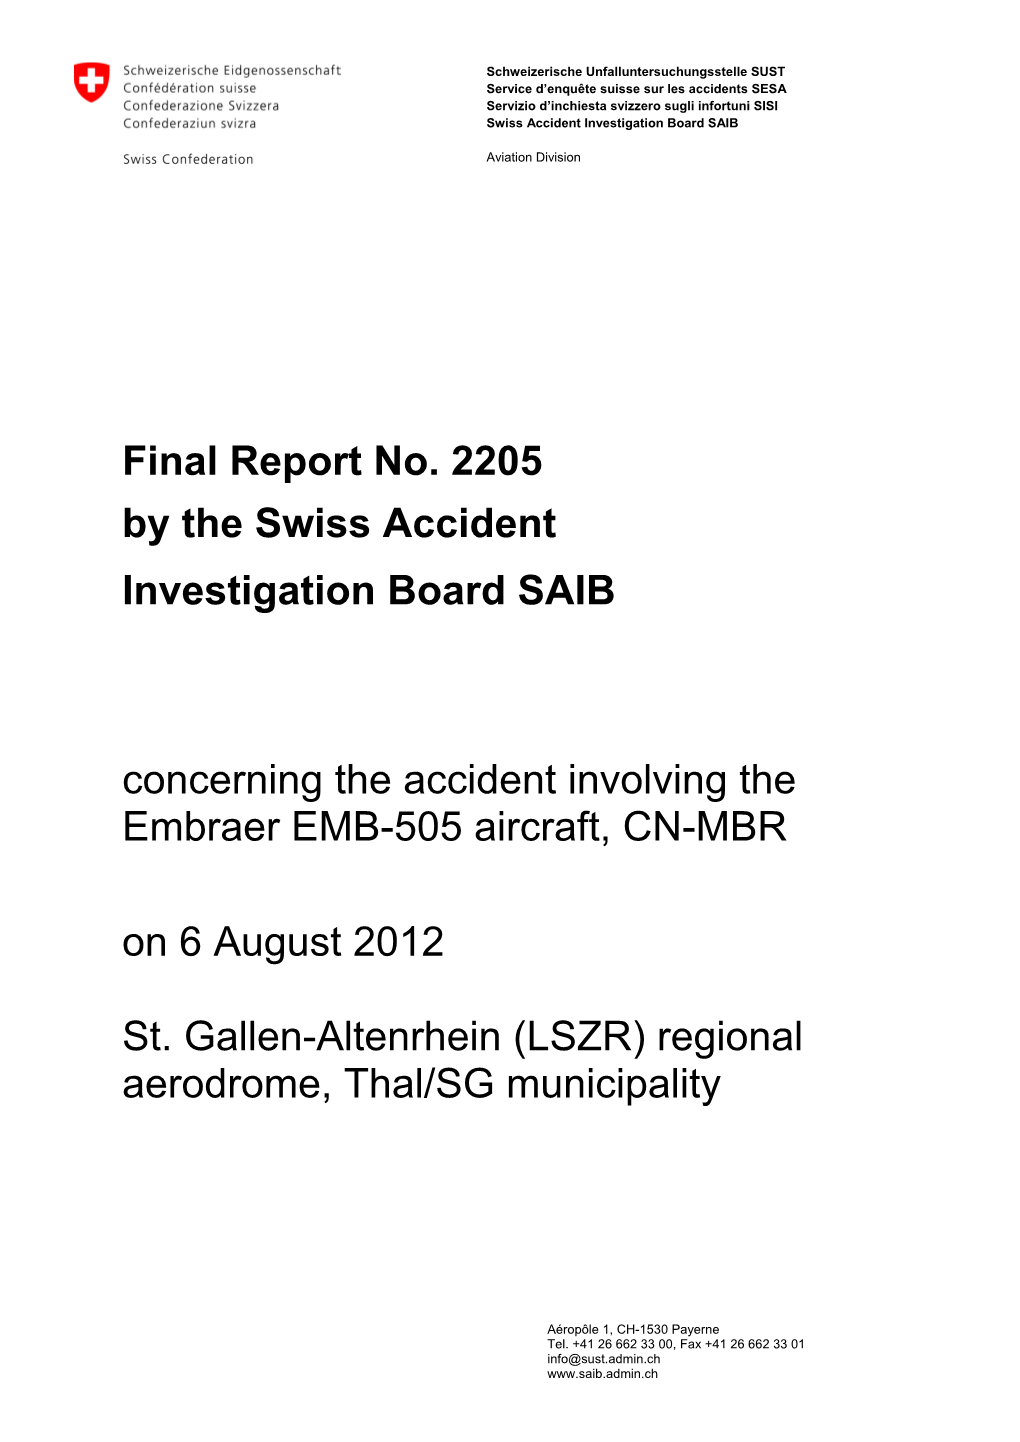 Final Report No. 2205 by the Swiss Accident Investigation Board SAIB